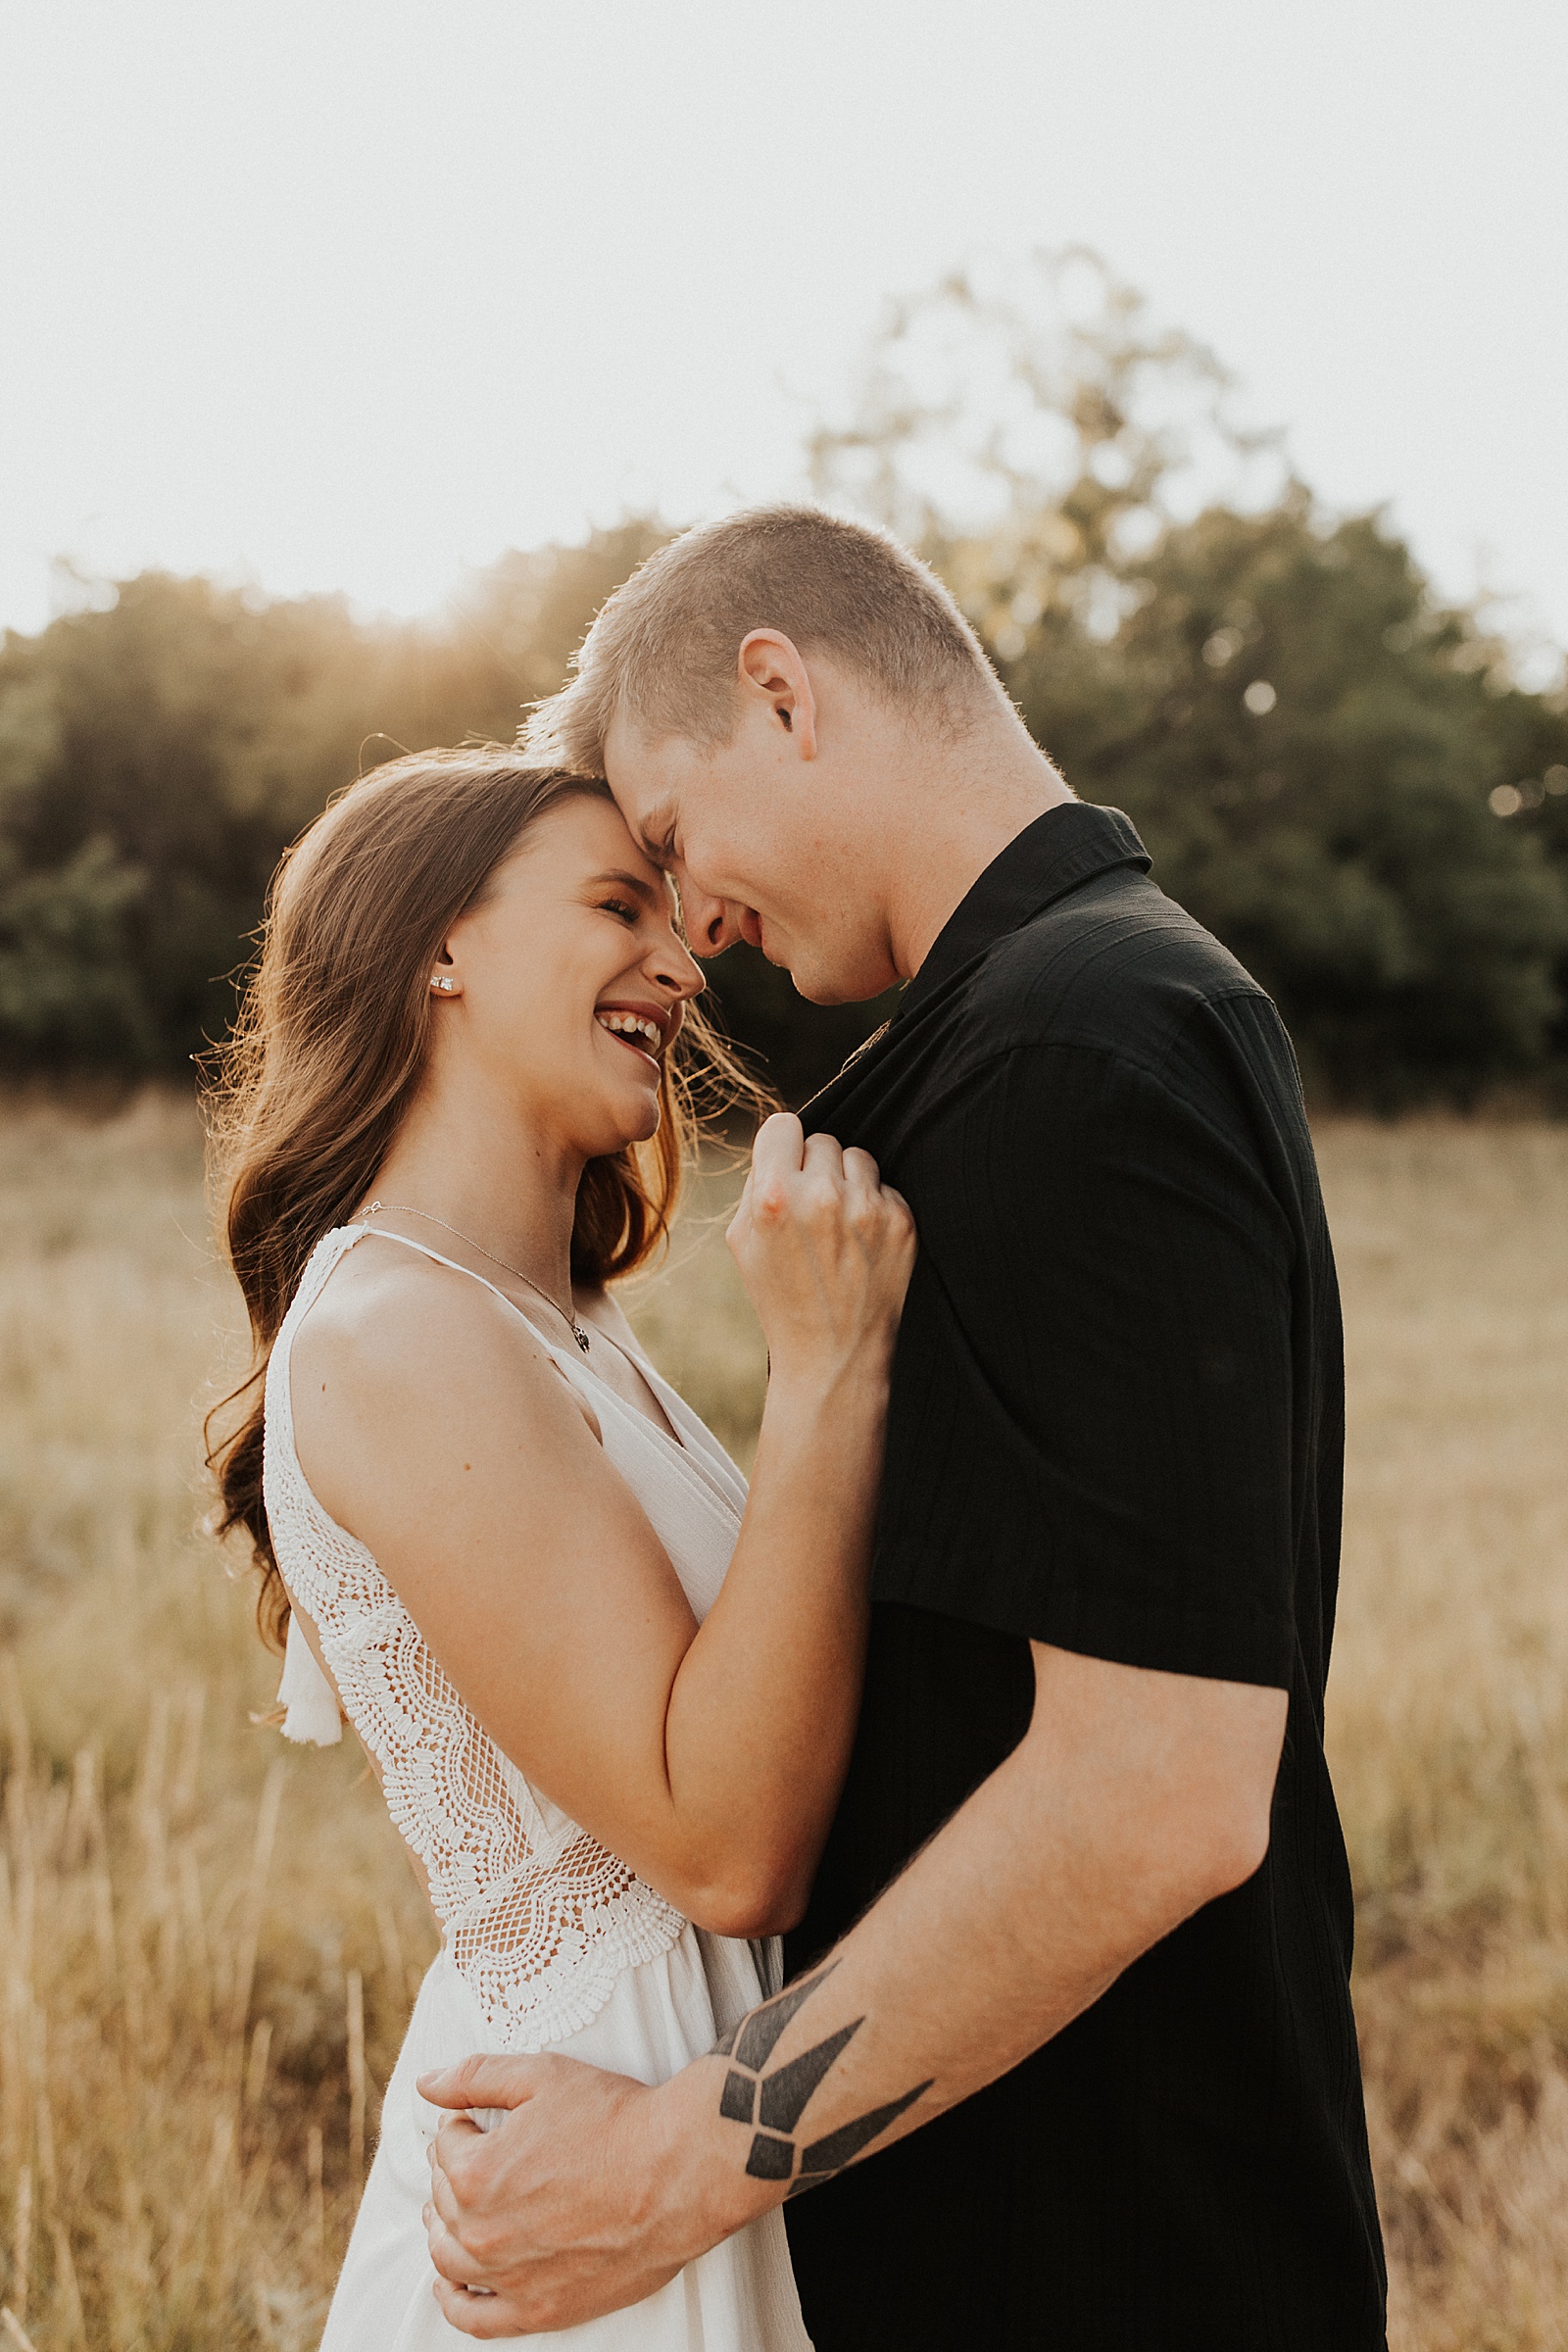 This Abilene TX engagement session actually includes the sweetest proposal!